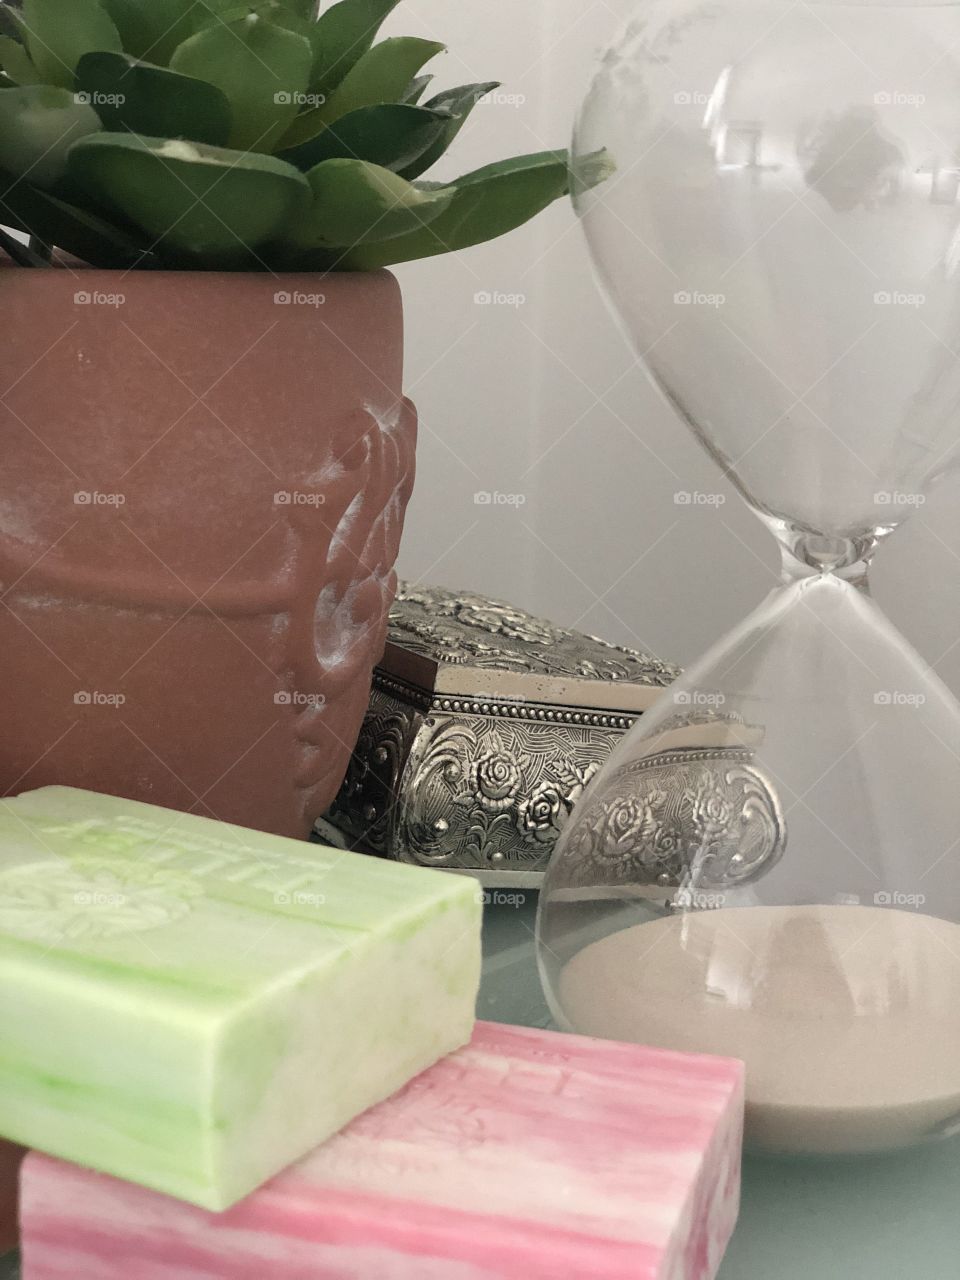 This arrangement of some soap, a timer, a pot plant and a jewellery box is quite lovely.